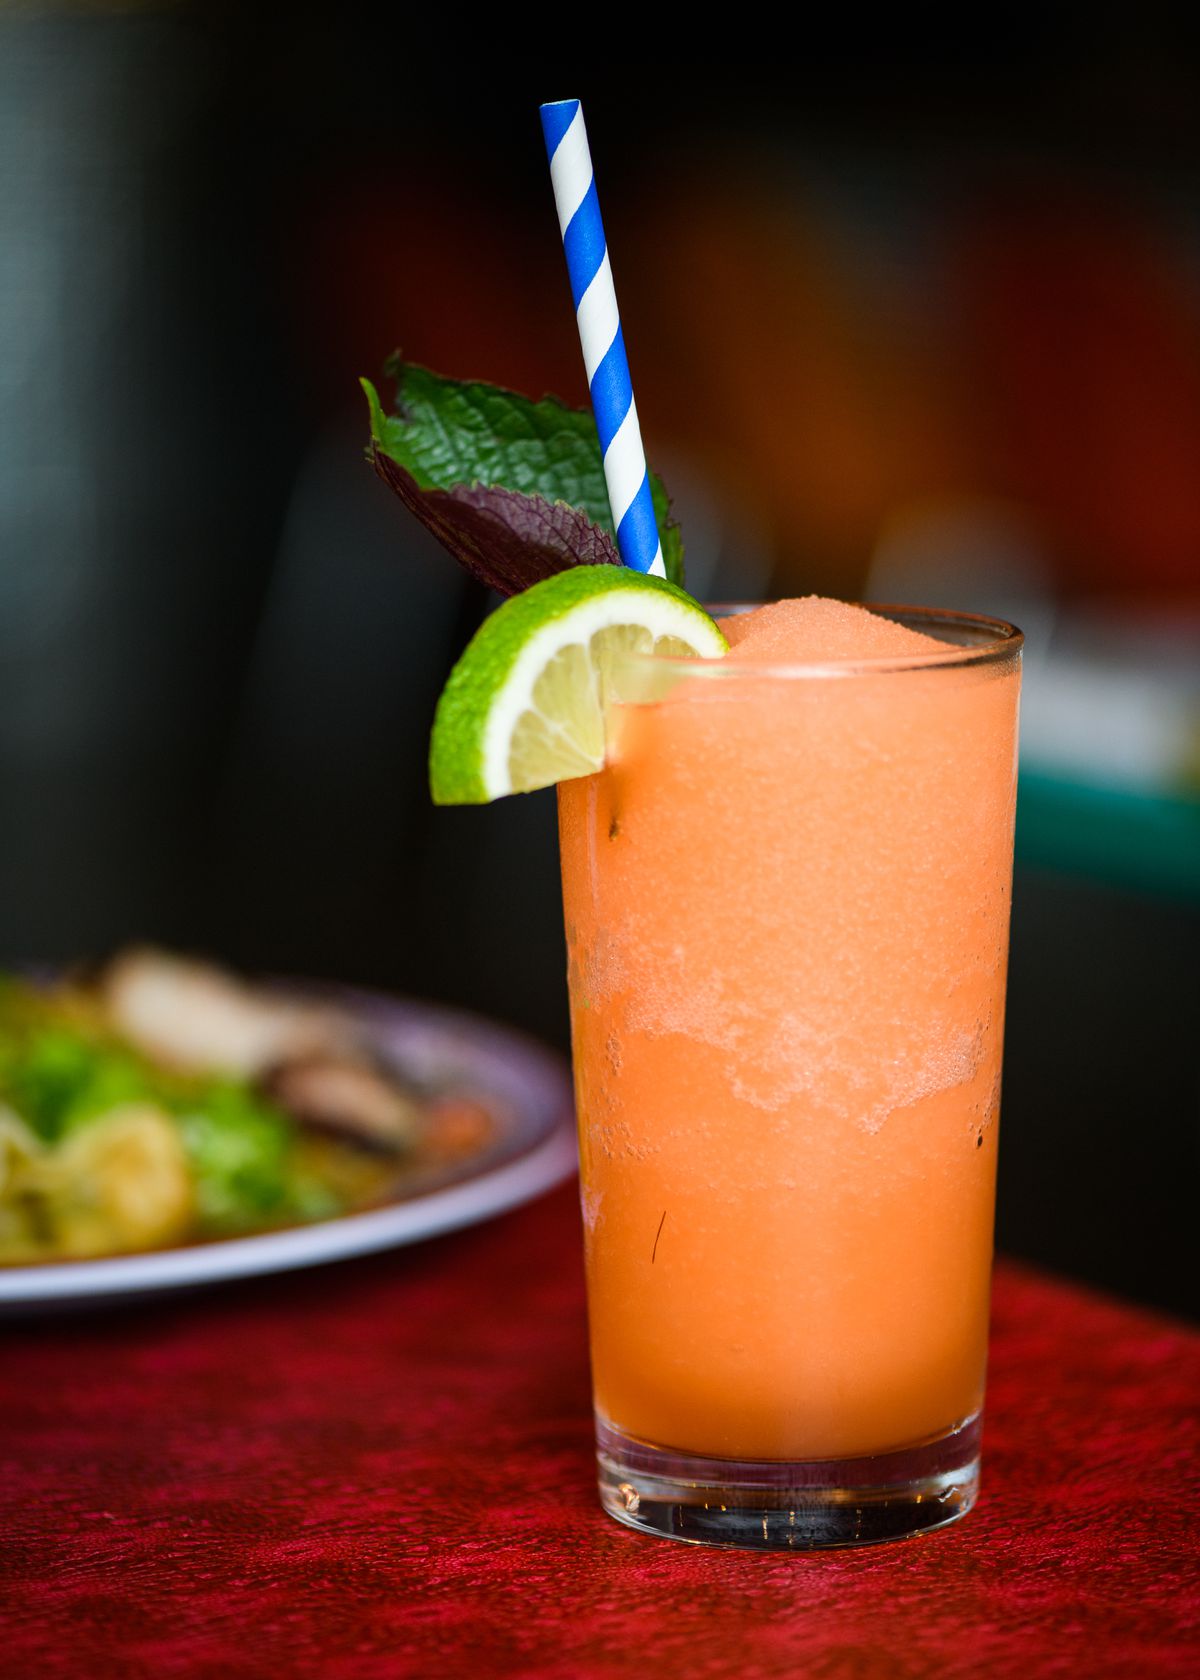 An orange slushie, garnished with a lime, sits on a red table at Oma’s Hideaway. The Moonage Daydream Slushie is made with tequila, pineapple, and mint.